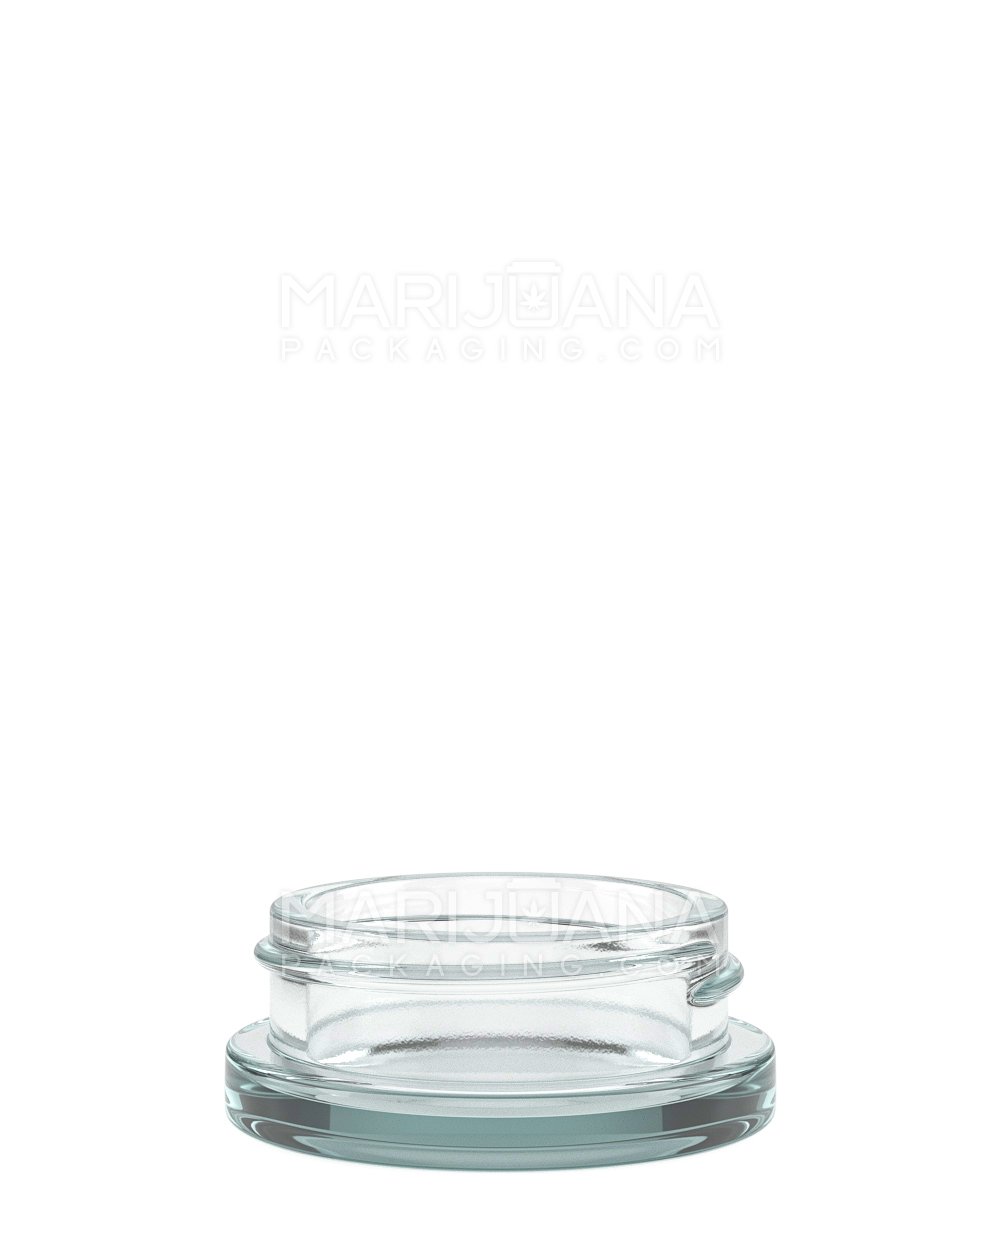 Clear Glass Concentrate Containers | 53mm - 15mL - 240 Count - 1